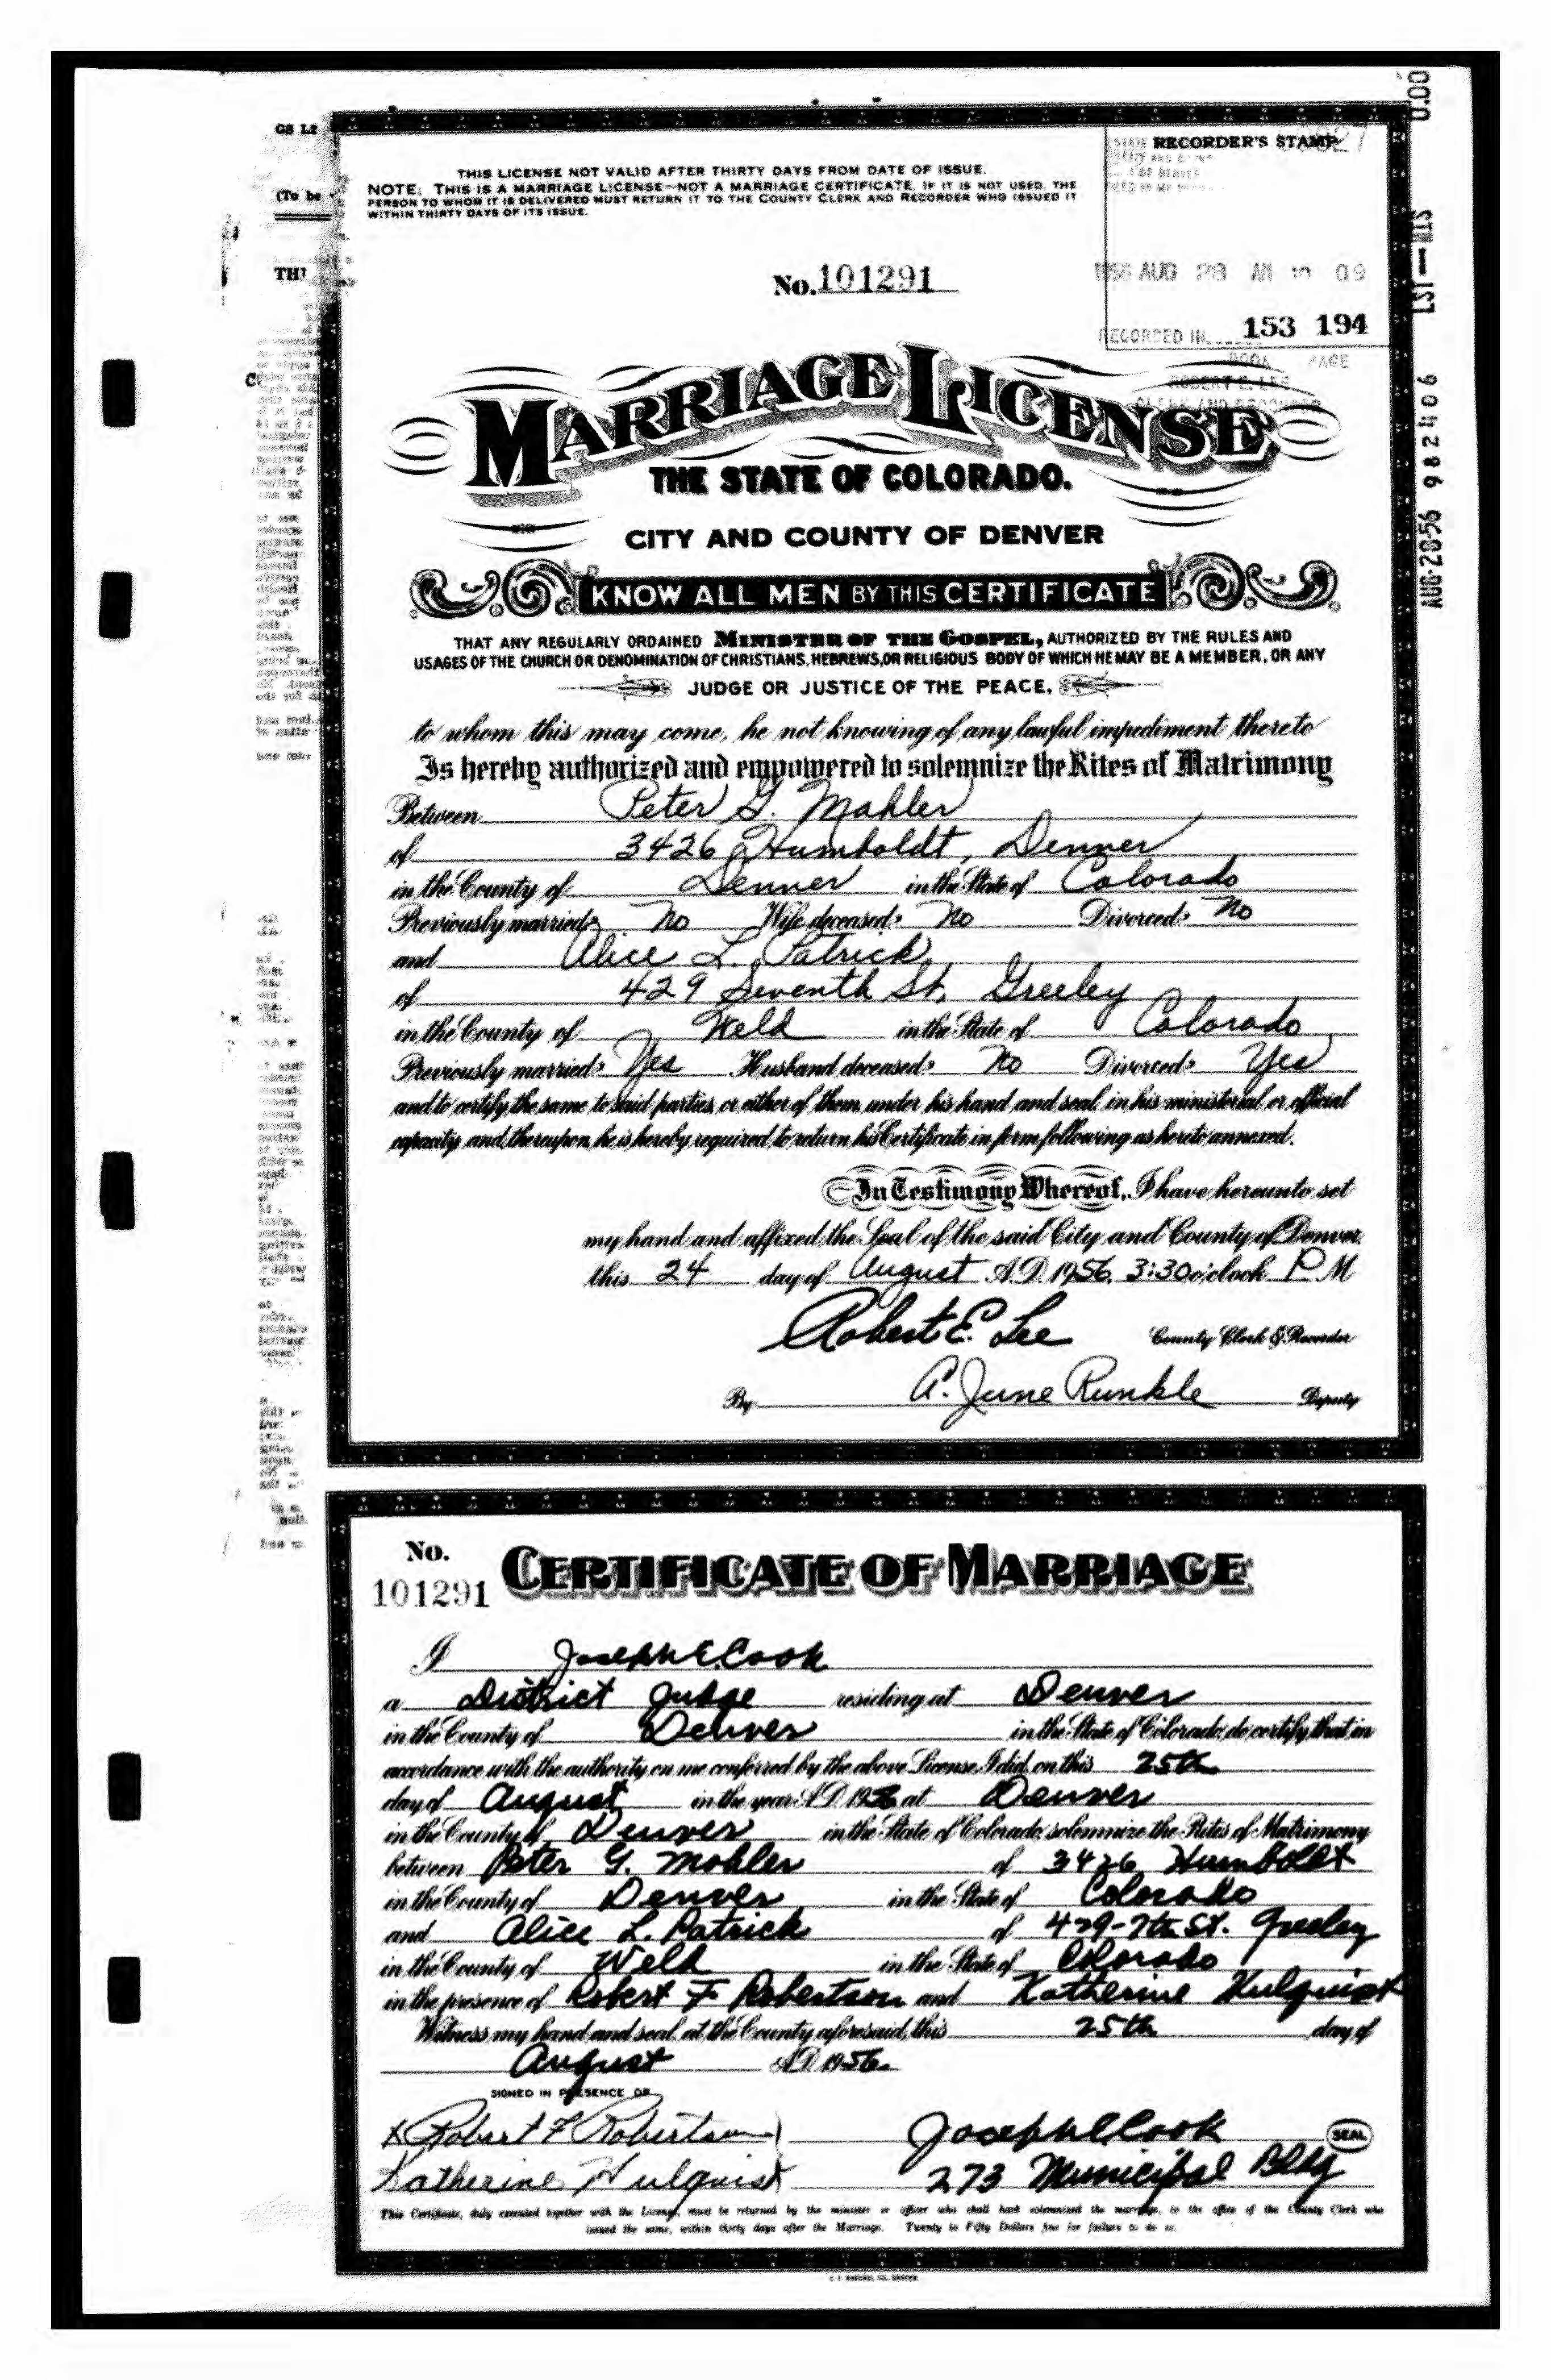 Marriage record of Peter G. Mahler and Alice L. Patrick